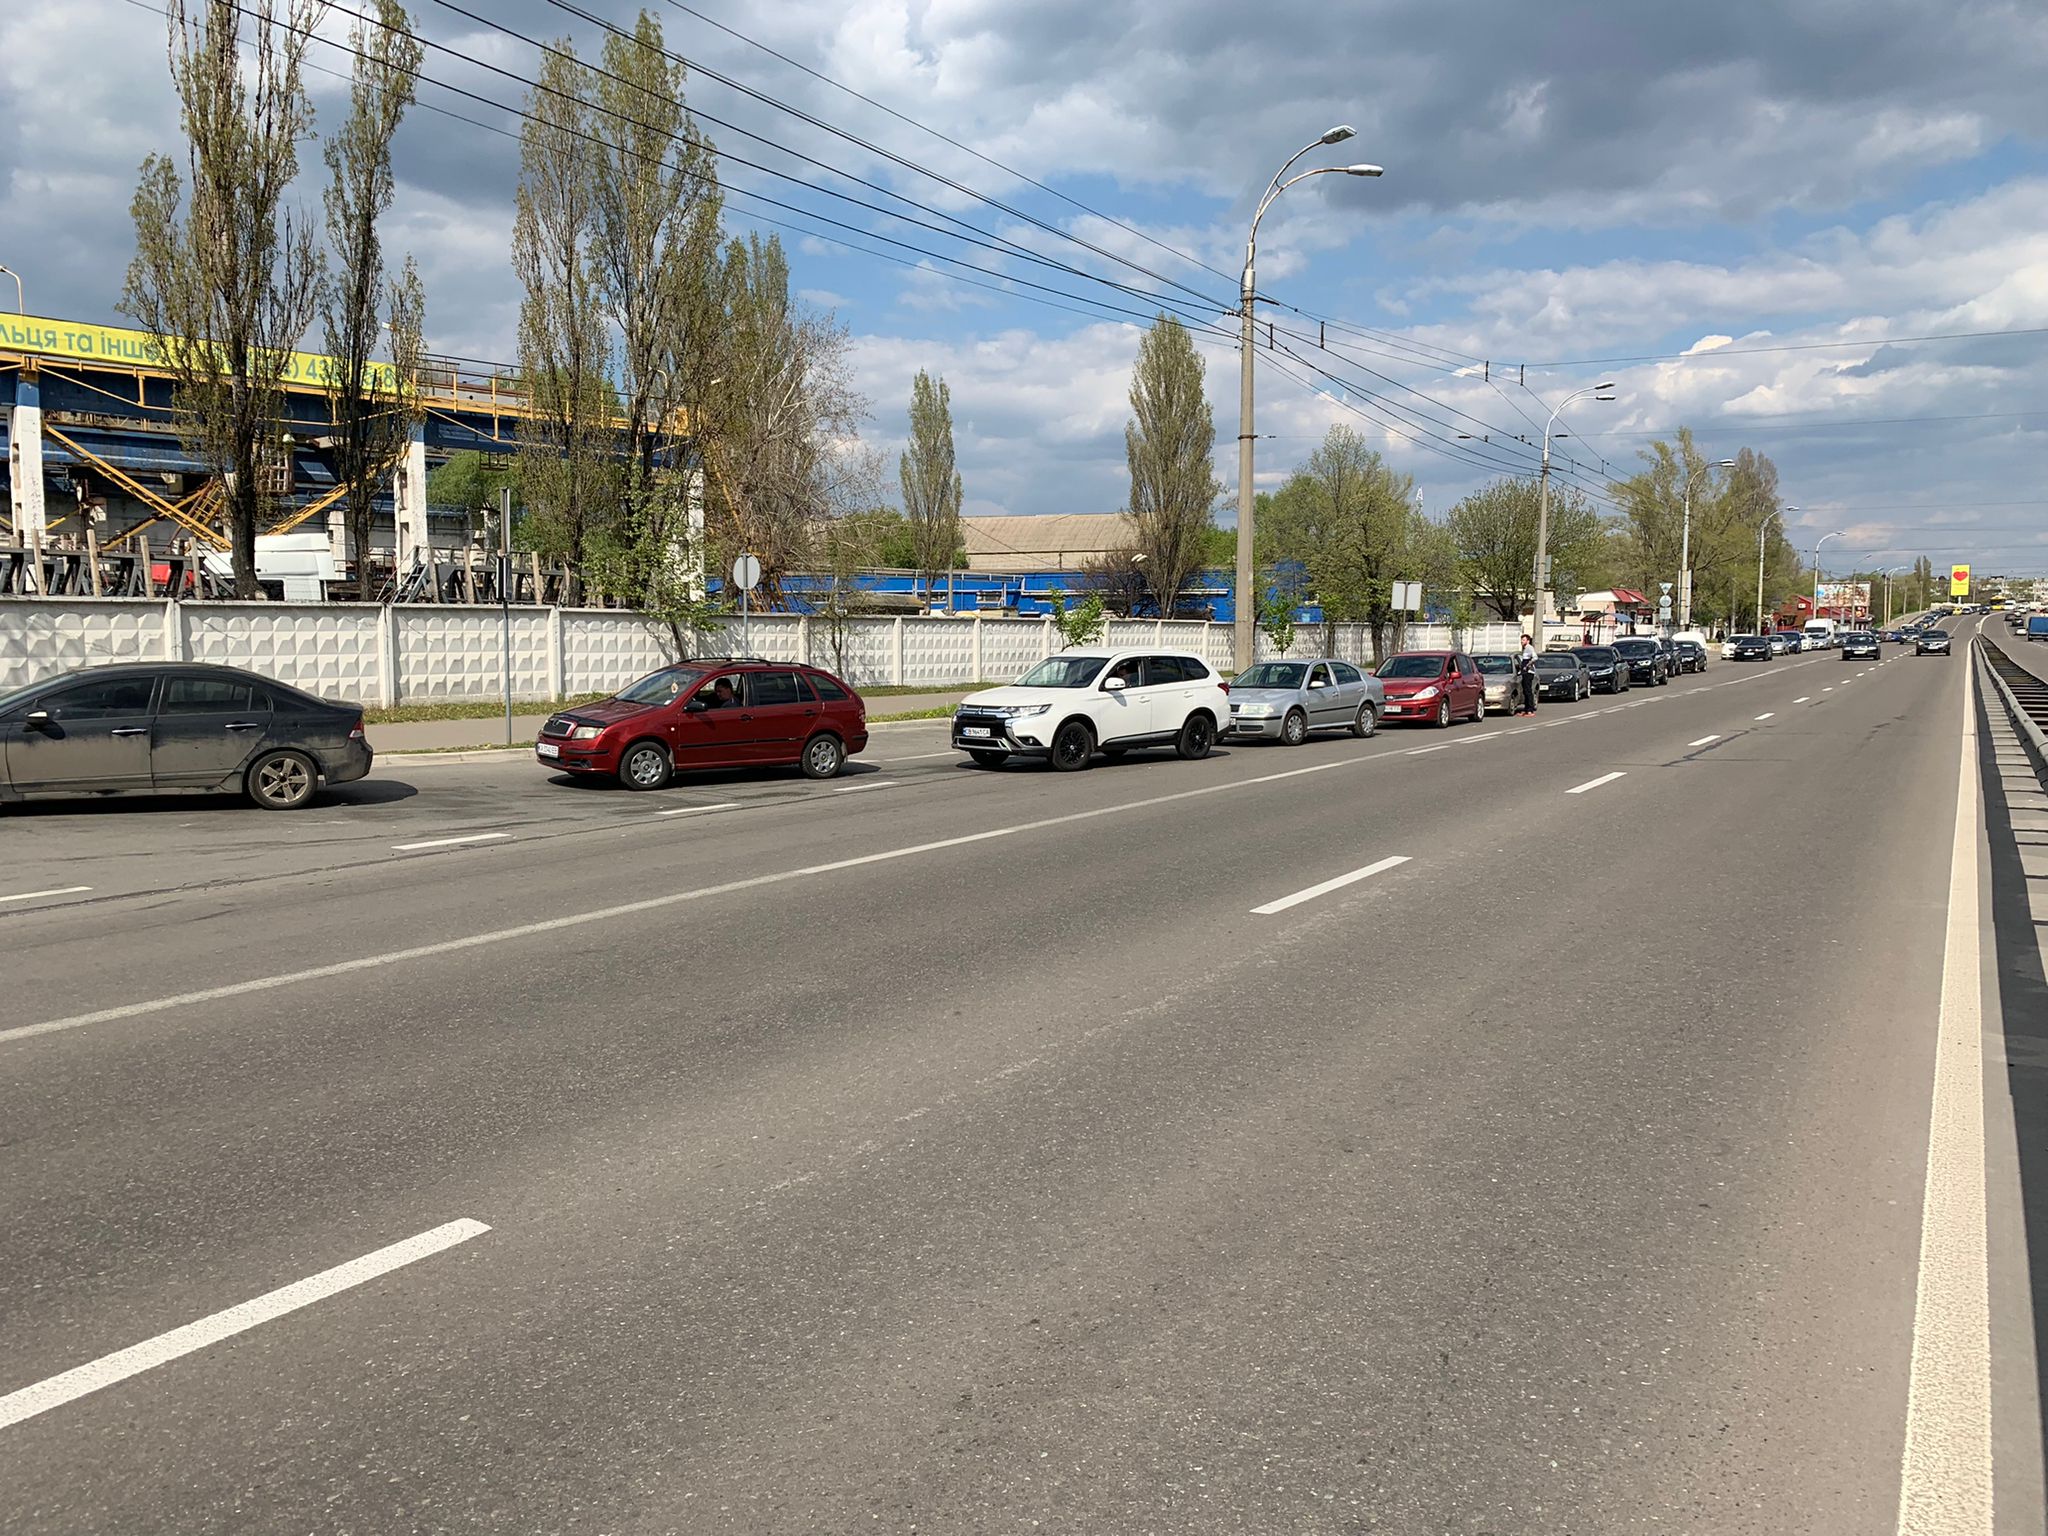 Long lines for fuel at a gas station in Kyiv, Ukraine, on May 3.